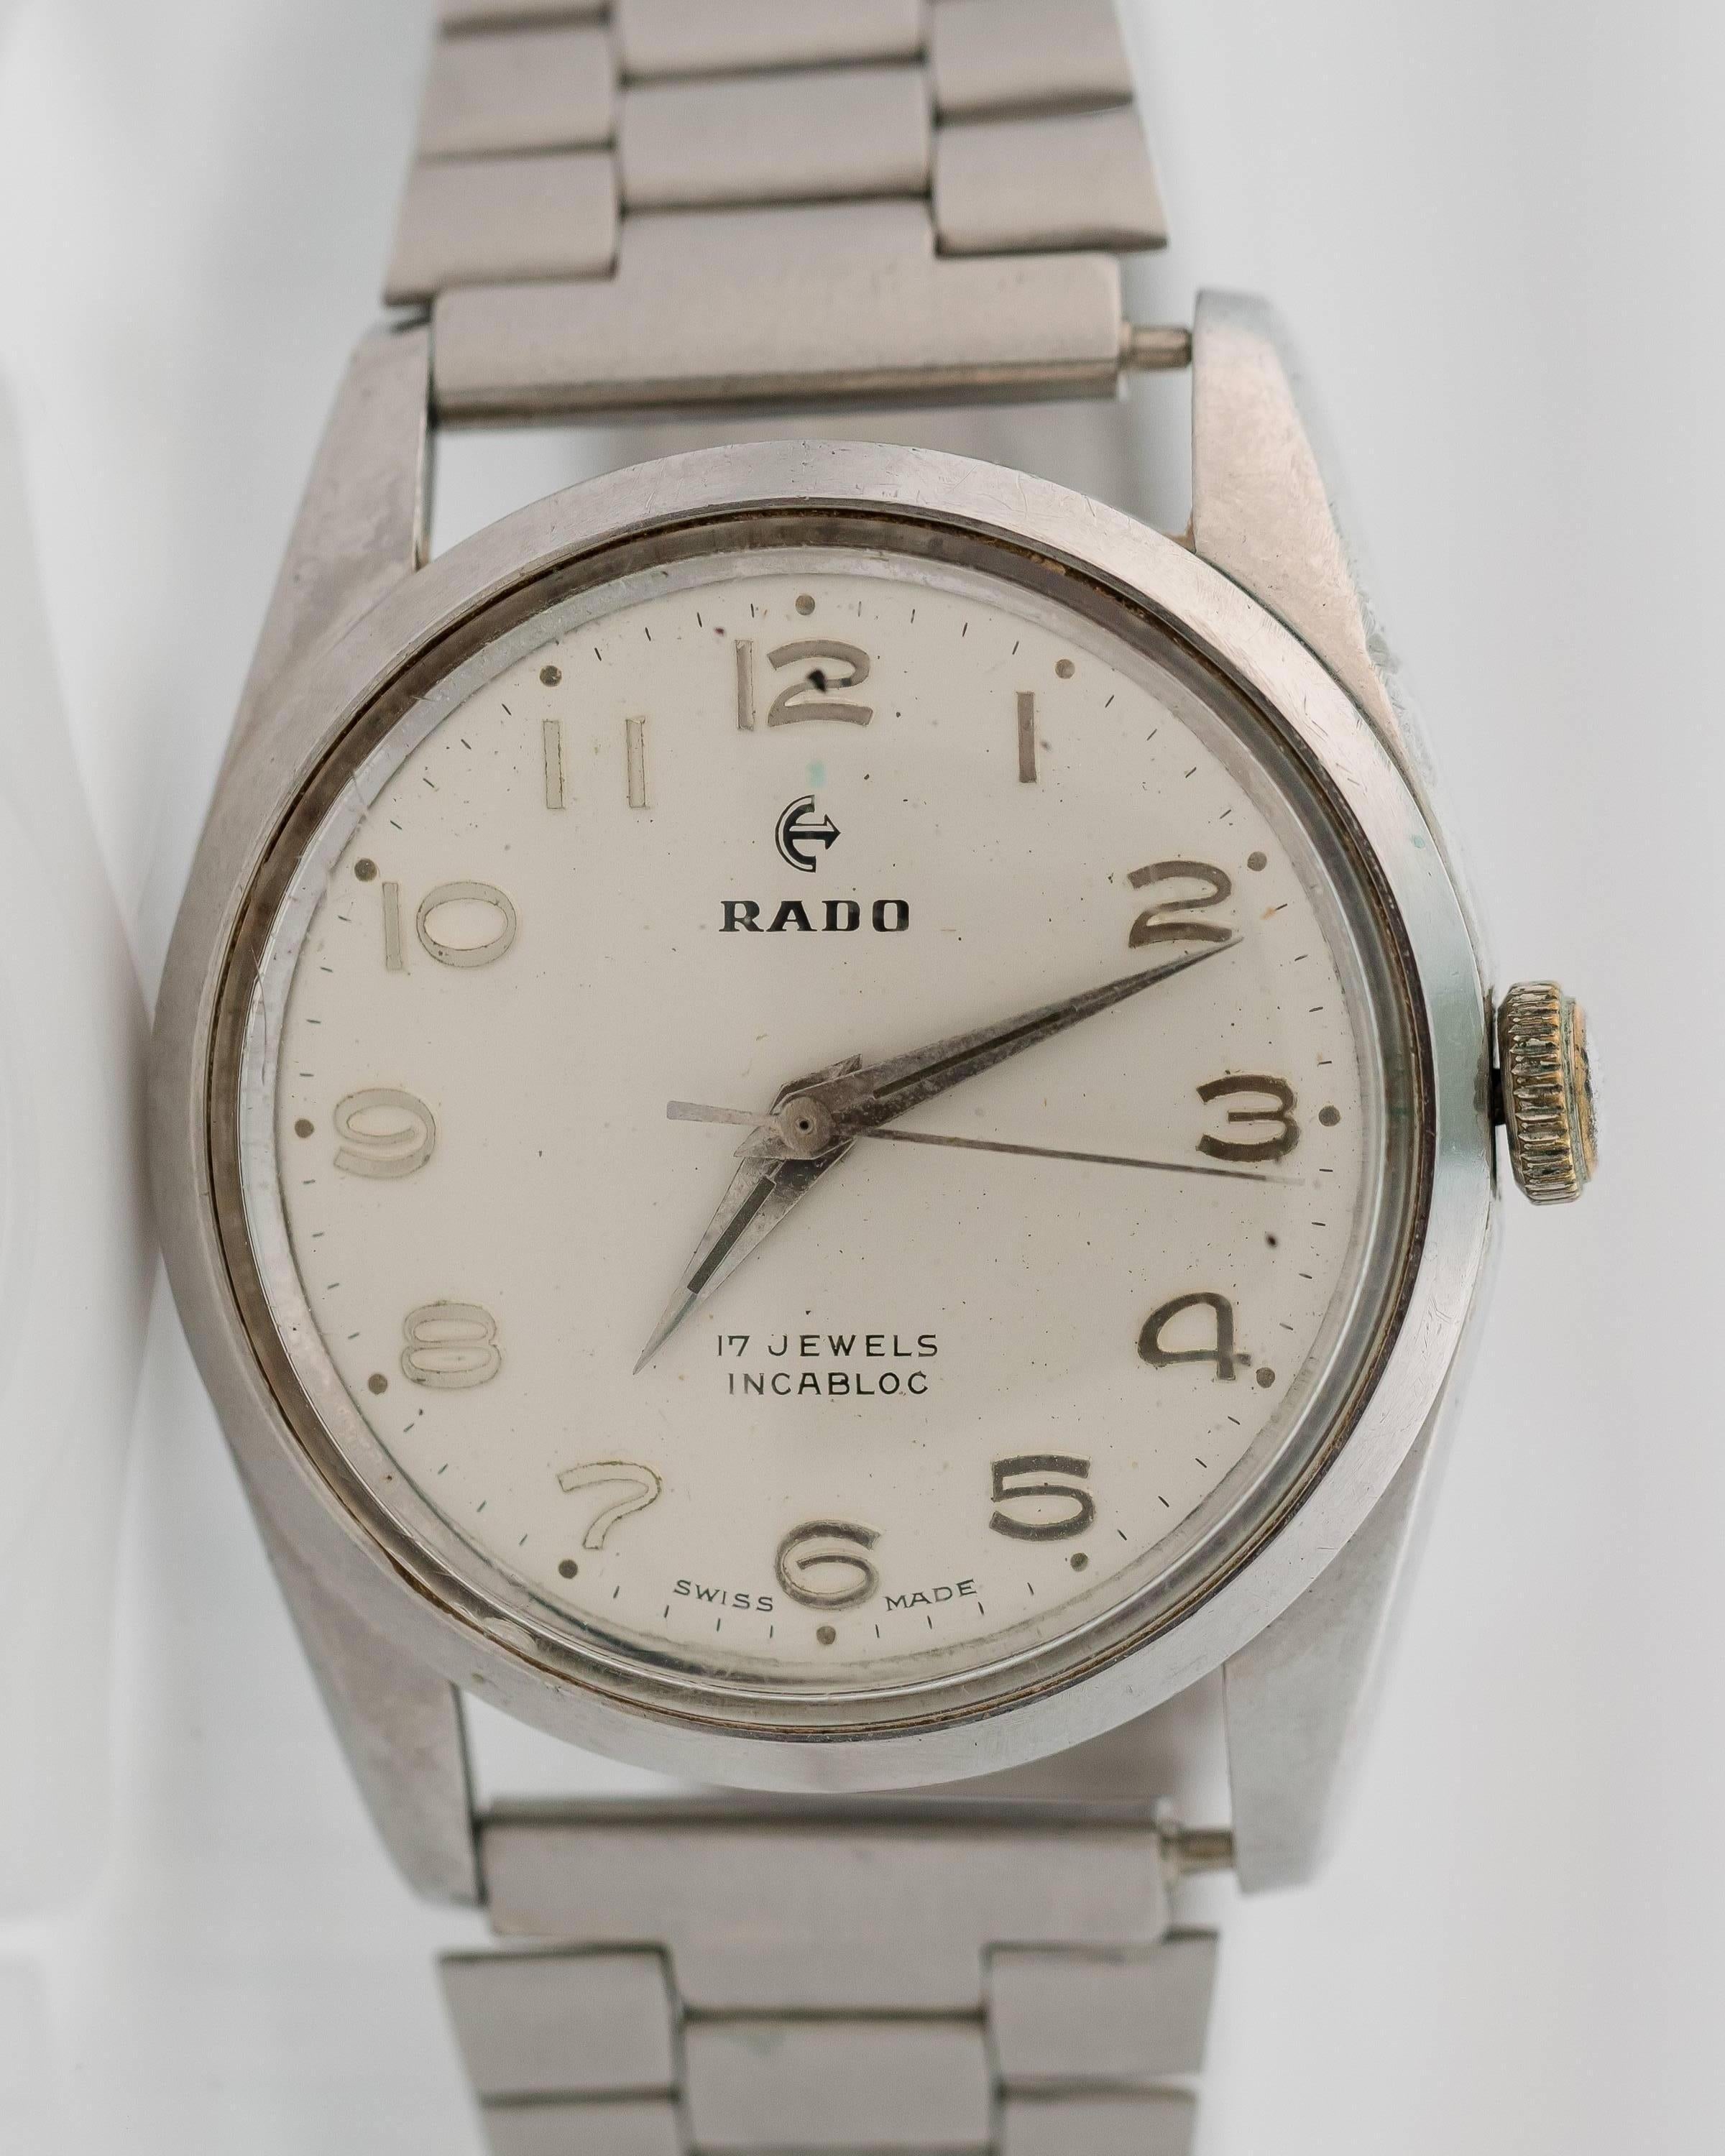 Incabloc means Shock Resistant! Rado utilized Incabloc shock-resistant technology in this Retro 1945 Watersealed watch to ensure optimal time-keeping performance. This classic Swiss-made watch features a silver Arabic dial with second hand, round